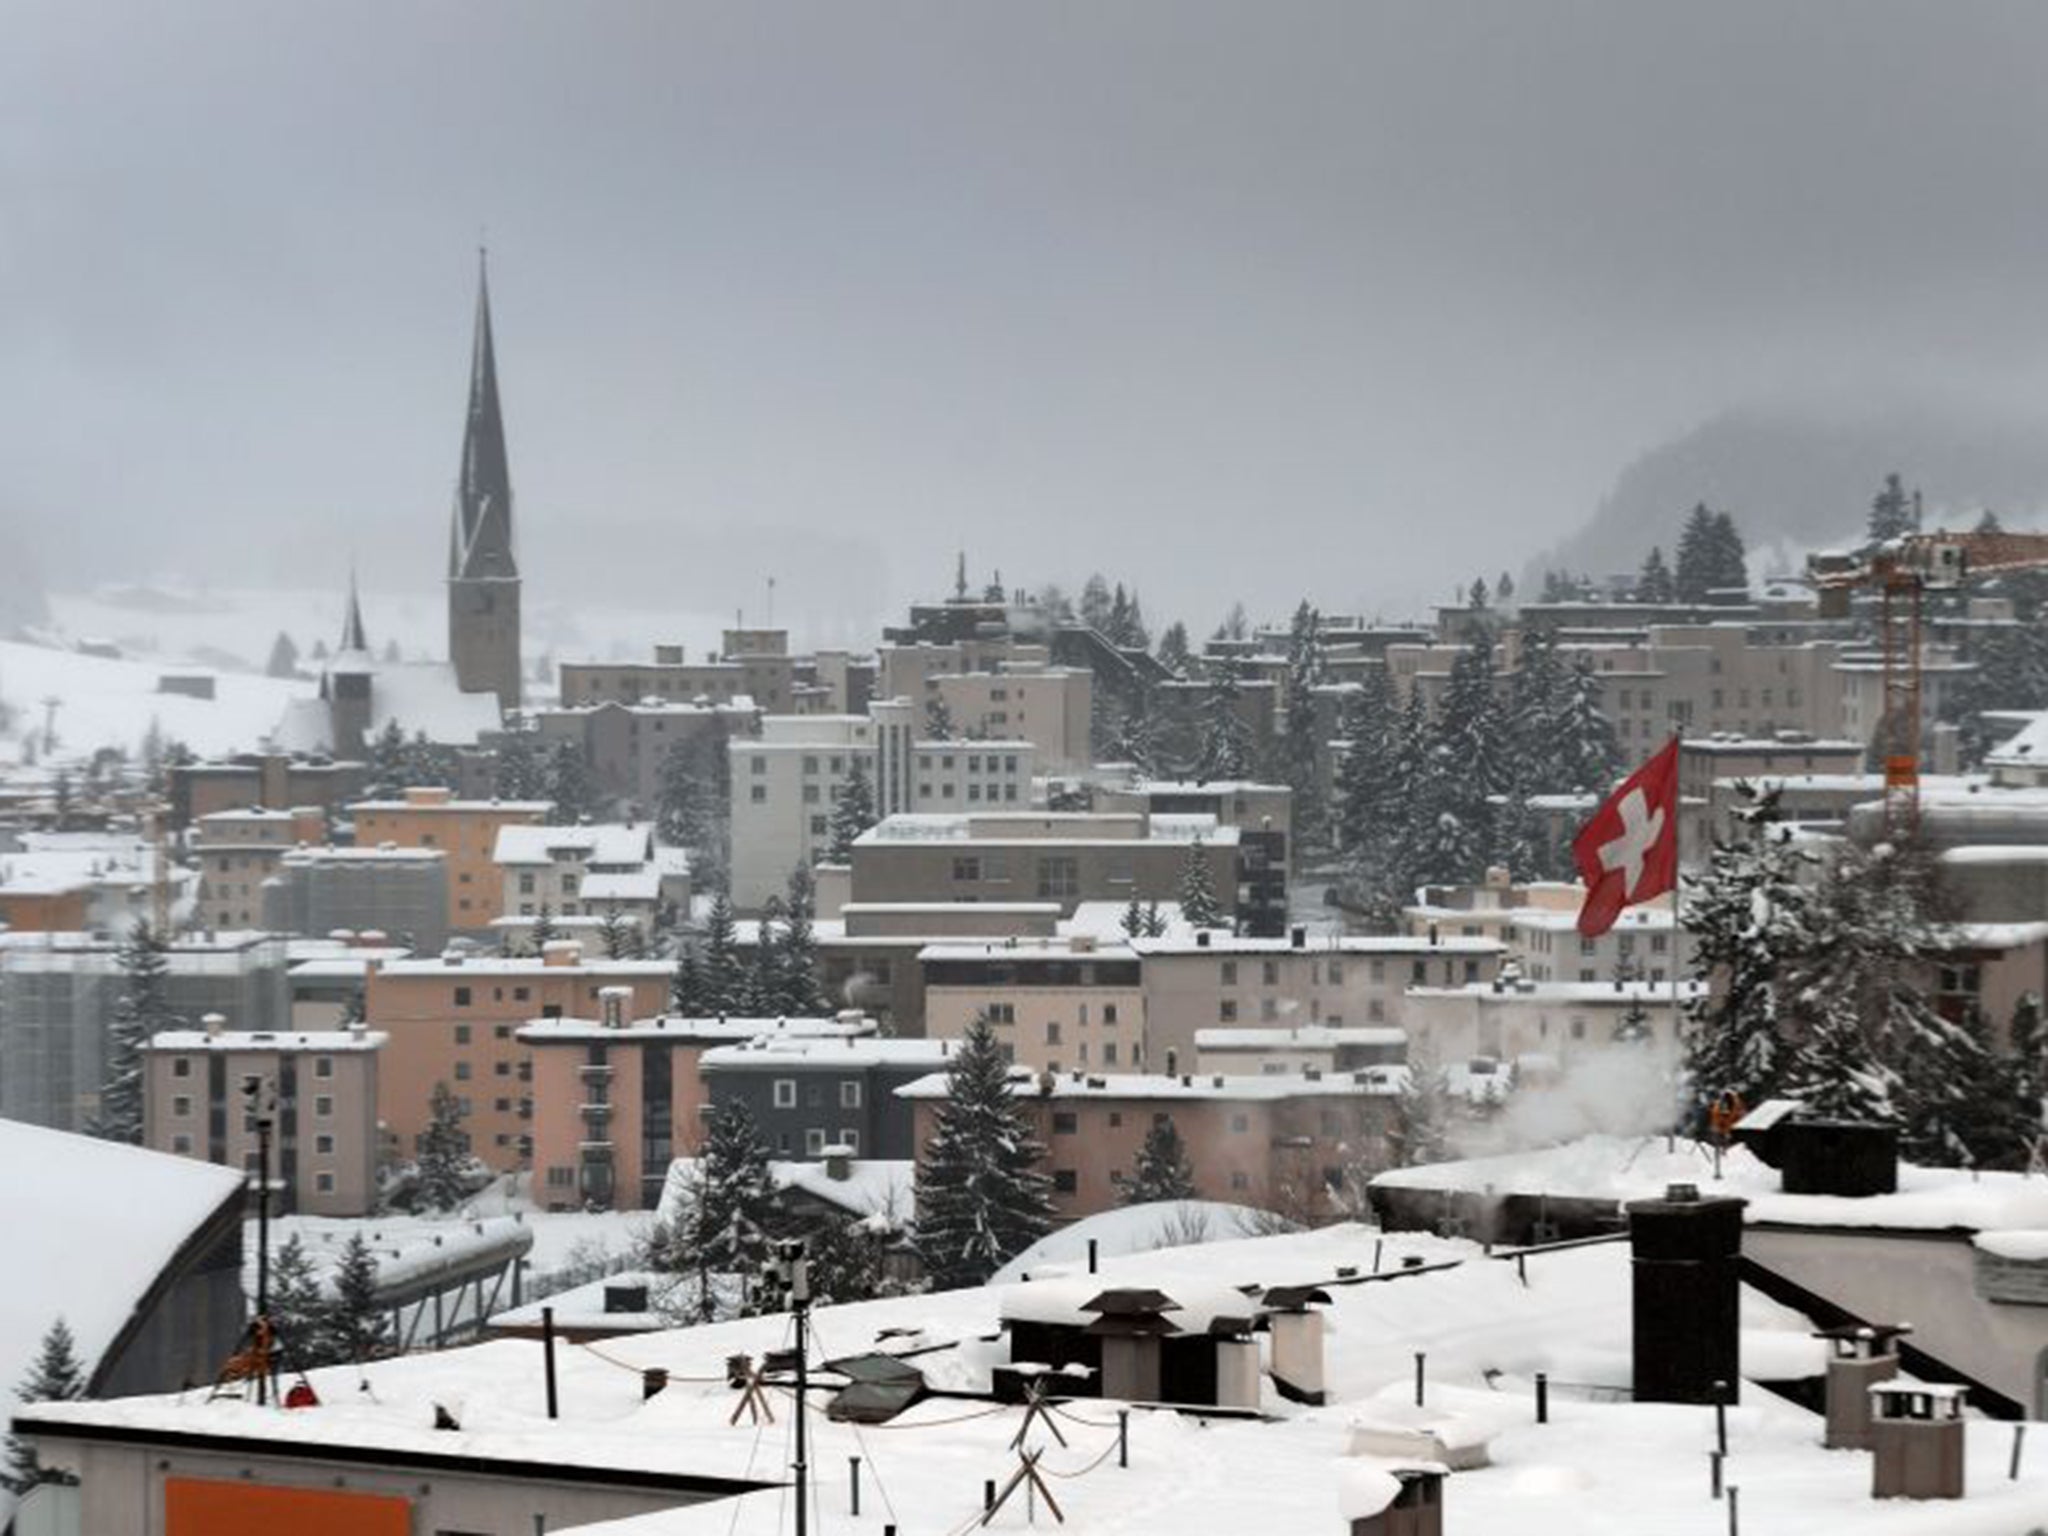 The Alpine resort of Davos is seen under show during the World Economic Forum annual meeting